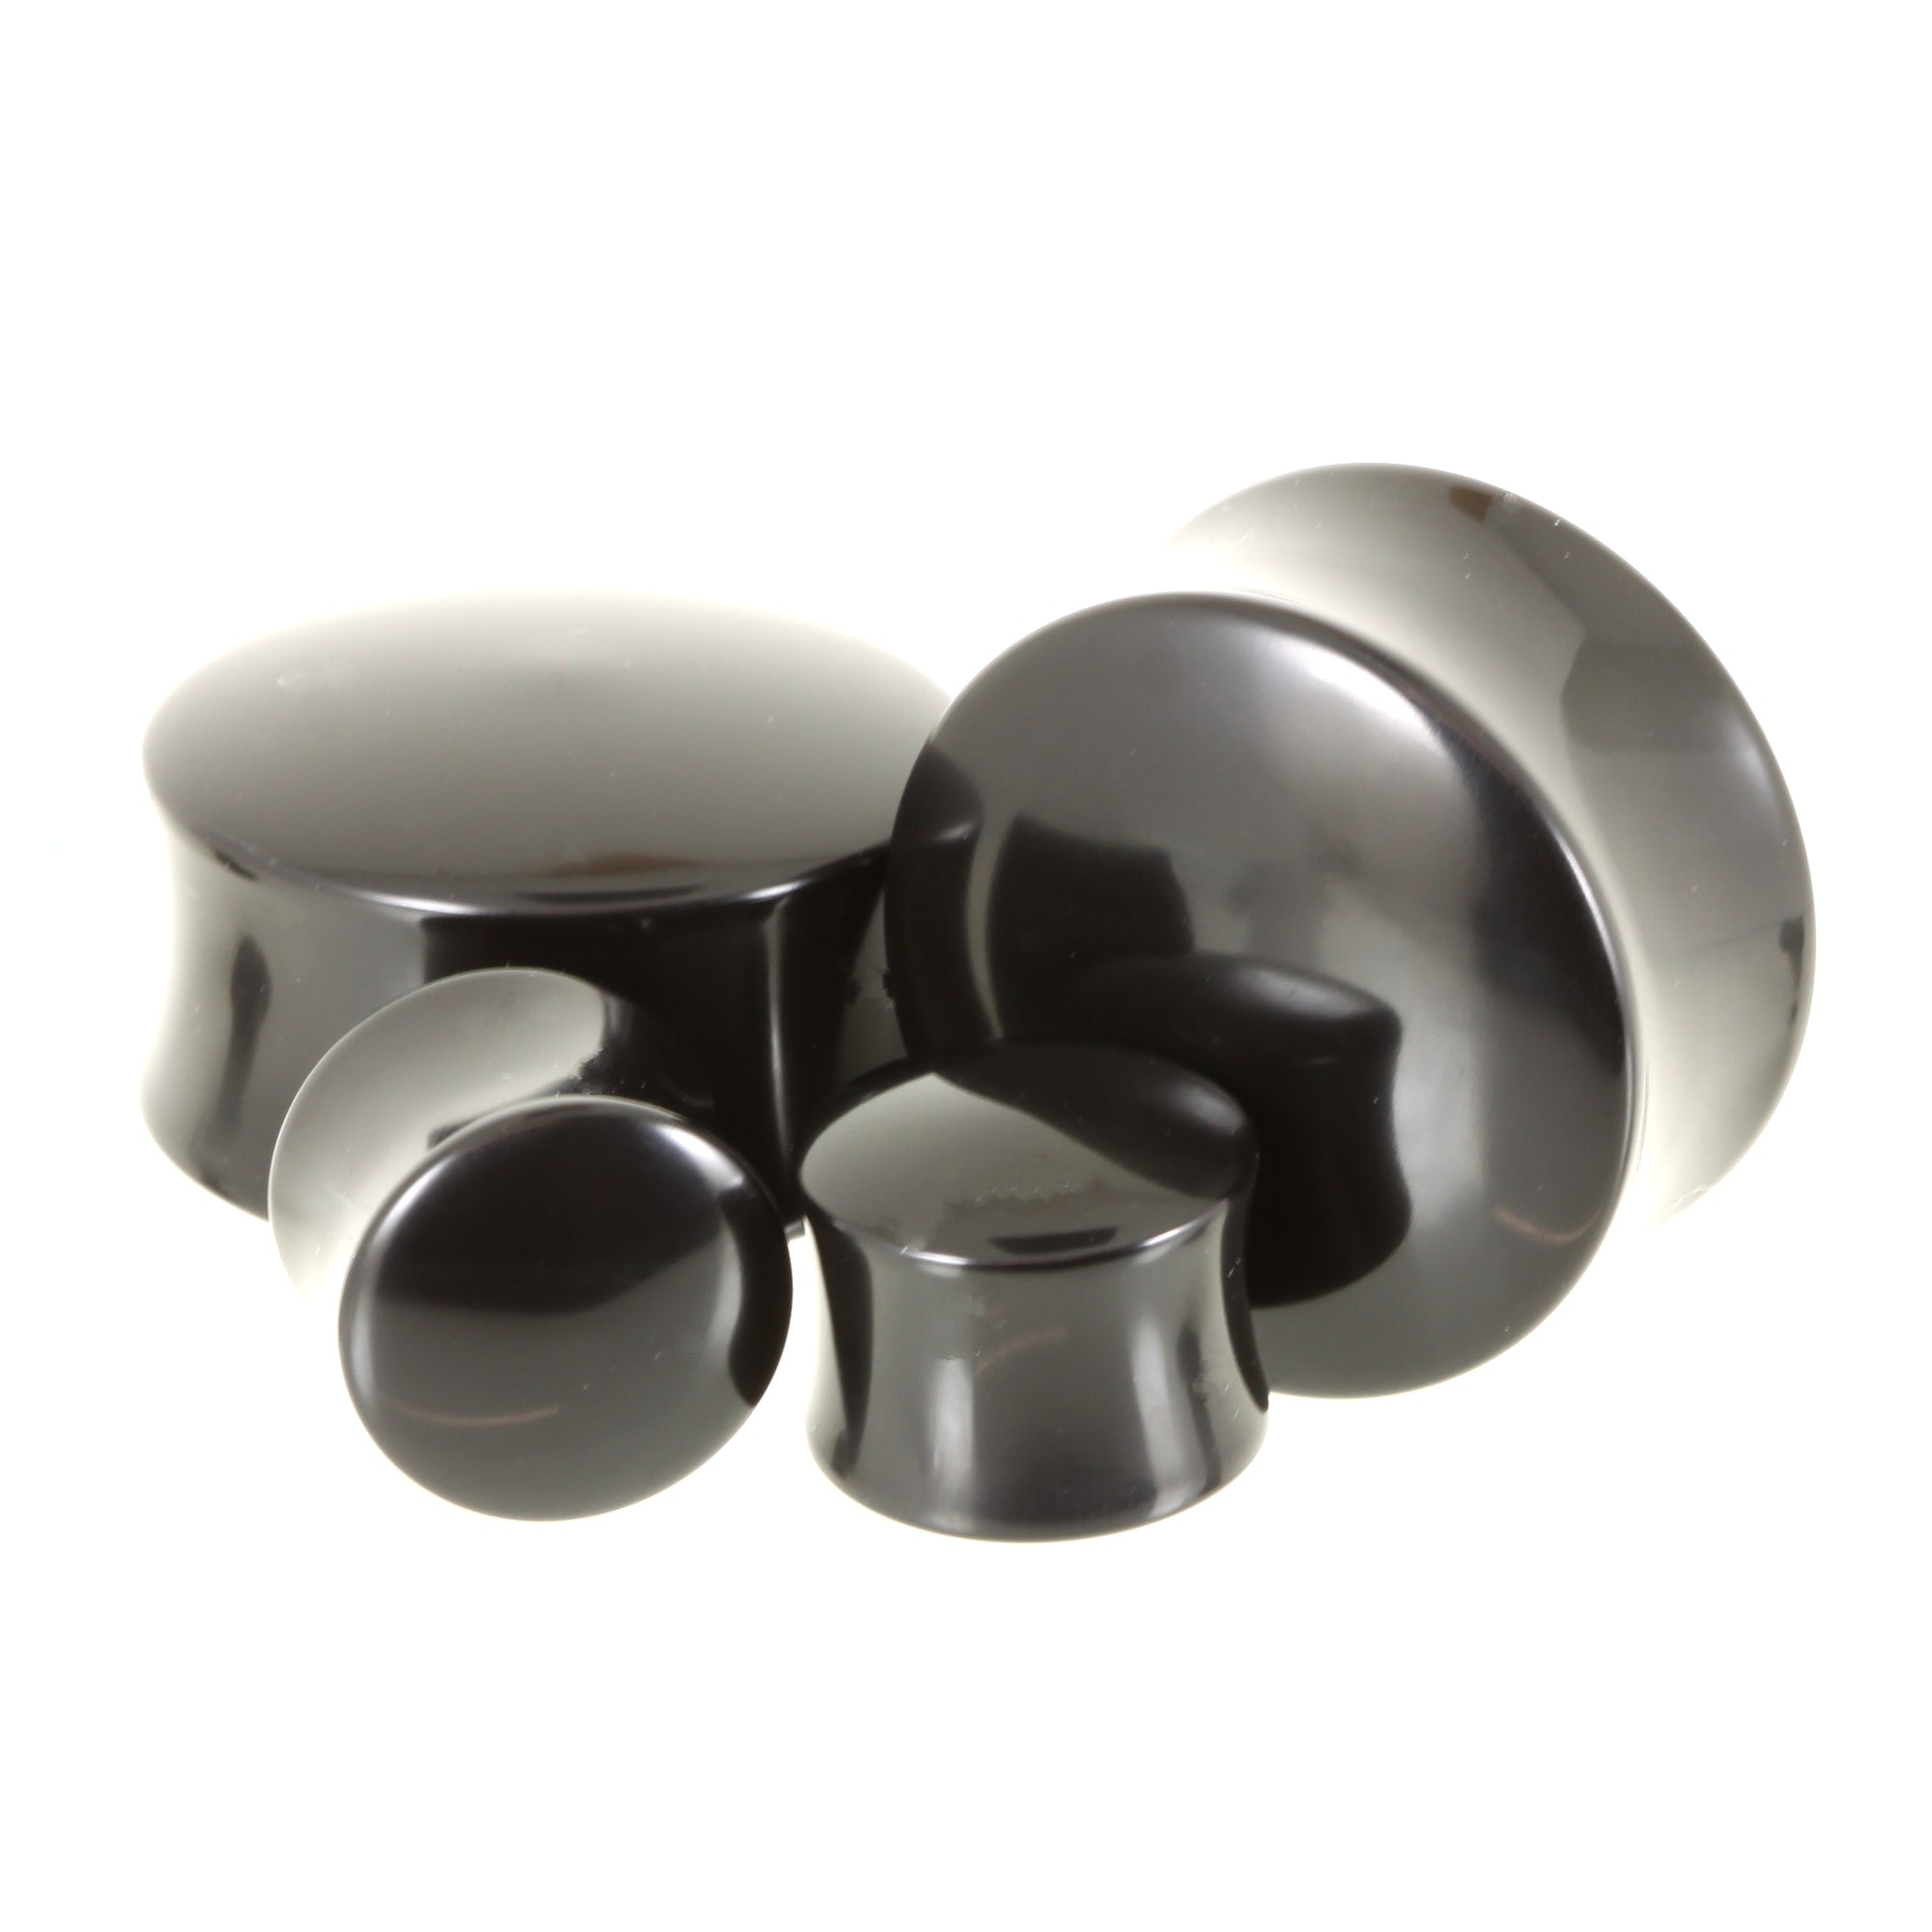 Delrin Double Flare Plugs | Pair